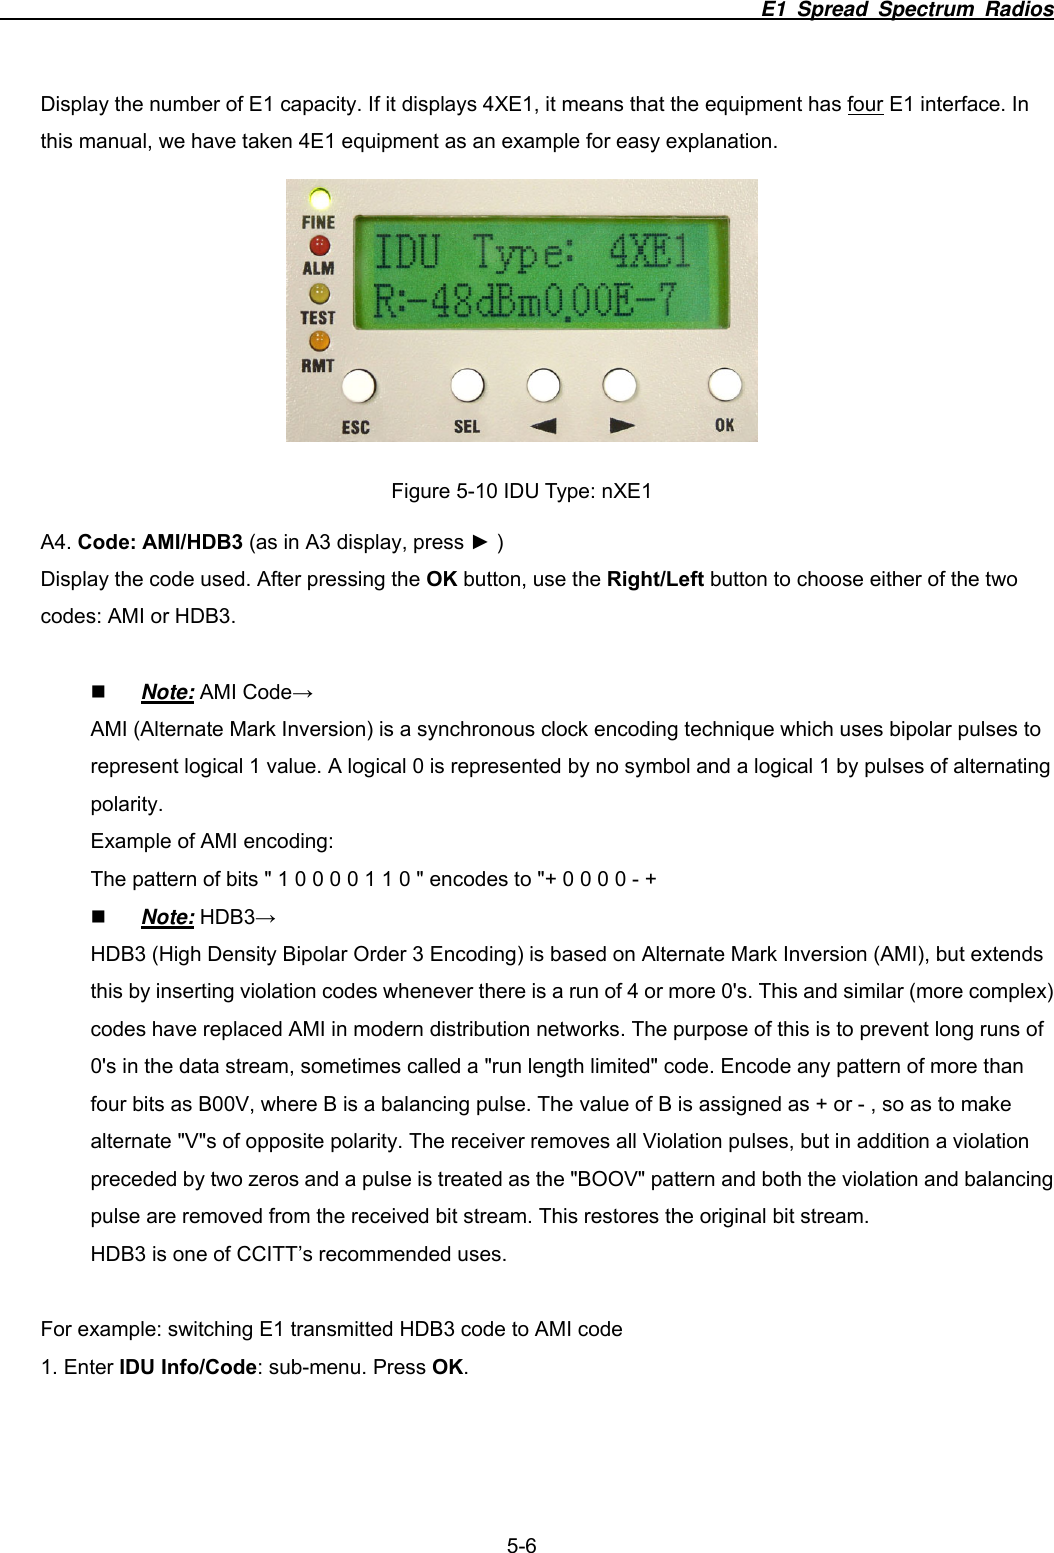                                                                          E1 Spread Spectrum Radios              5-6 Display the number of E1 capacity. If it displays 4XE1, it means that the equipment has four E1 interface. In this manual, we have taken 4E1 equipment as an example for easy explanation.  Figure 5-10 IDU Type: nXE1 A4. Code: AMI/HDB3 (as in A3 display, press ► ) Display the code used. After pressing the OK button, use the Right/Left button to choose either of the two codes: AMI or HDB3.   Note: AMI Code→ AMI (Alternate Mark Inversion) is a synchronous clock encoding technique which uses bipolar pulses to represent logical 1 value. A logical 0 is represented by no symbol and a logical 1 by pulses of alternating polarity. Example of AMI encoding: The pattern of bits &quot; 1 0 0 0 0 1 1 0 &quot; encodes to &quot;+ 0 0 0 0 - +    Note: HDB3→ HDB3 (High Density Bipolar Order 3 Encoding) is based on Alternate Mark Inversion (AMI), but extends this by inserting violation codes whenever there is a run of 4 or more 0&apos;s. This and similar (more complex) codes have replaced AMI in modern distribution networks. The purpose of this is to prevent long runs of 0&apos;s in the data stream, sometimes called a &quot;run length limited&quot; code. Encode any pattern of more than four bits as B00V, where B is a balancing pulse. The value of B is assigned as + or - , so as to make alternate &quot;V&quot;s of opposite polarity. The receiver removes all Violation pulses, but in addition a violation preceded by two zeros and a pulse is treated as the &quot;BOOV&quot; pattern and both the violation and balancing pulse are removed from the received bit stream. This restores the original bit stream. HDB3 is one of CCITT’s recommended uses.  For example: switching E1 transmitted HDB3 code to AMI code   1. Enter IDU Info/Code: sub-menu. Press OK. 